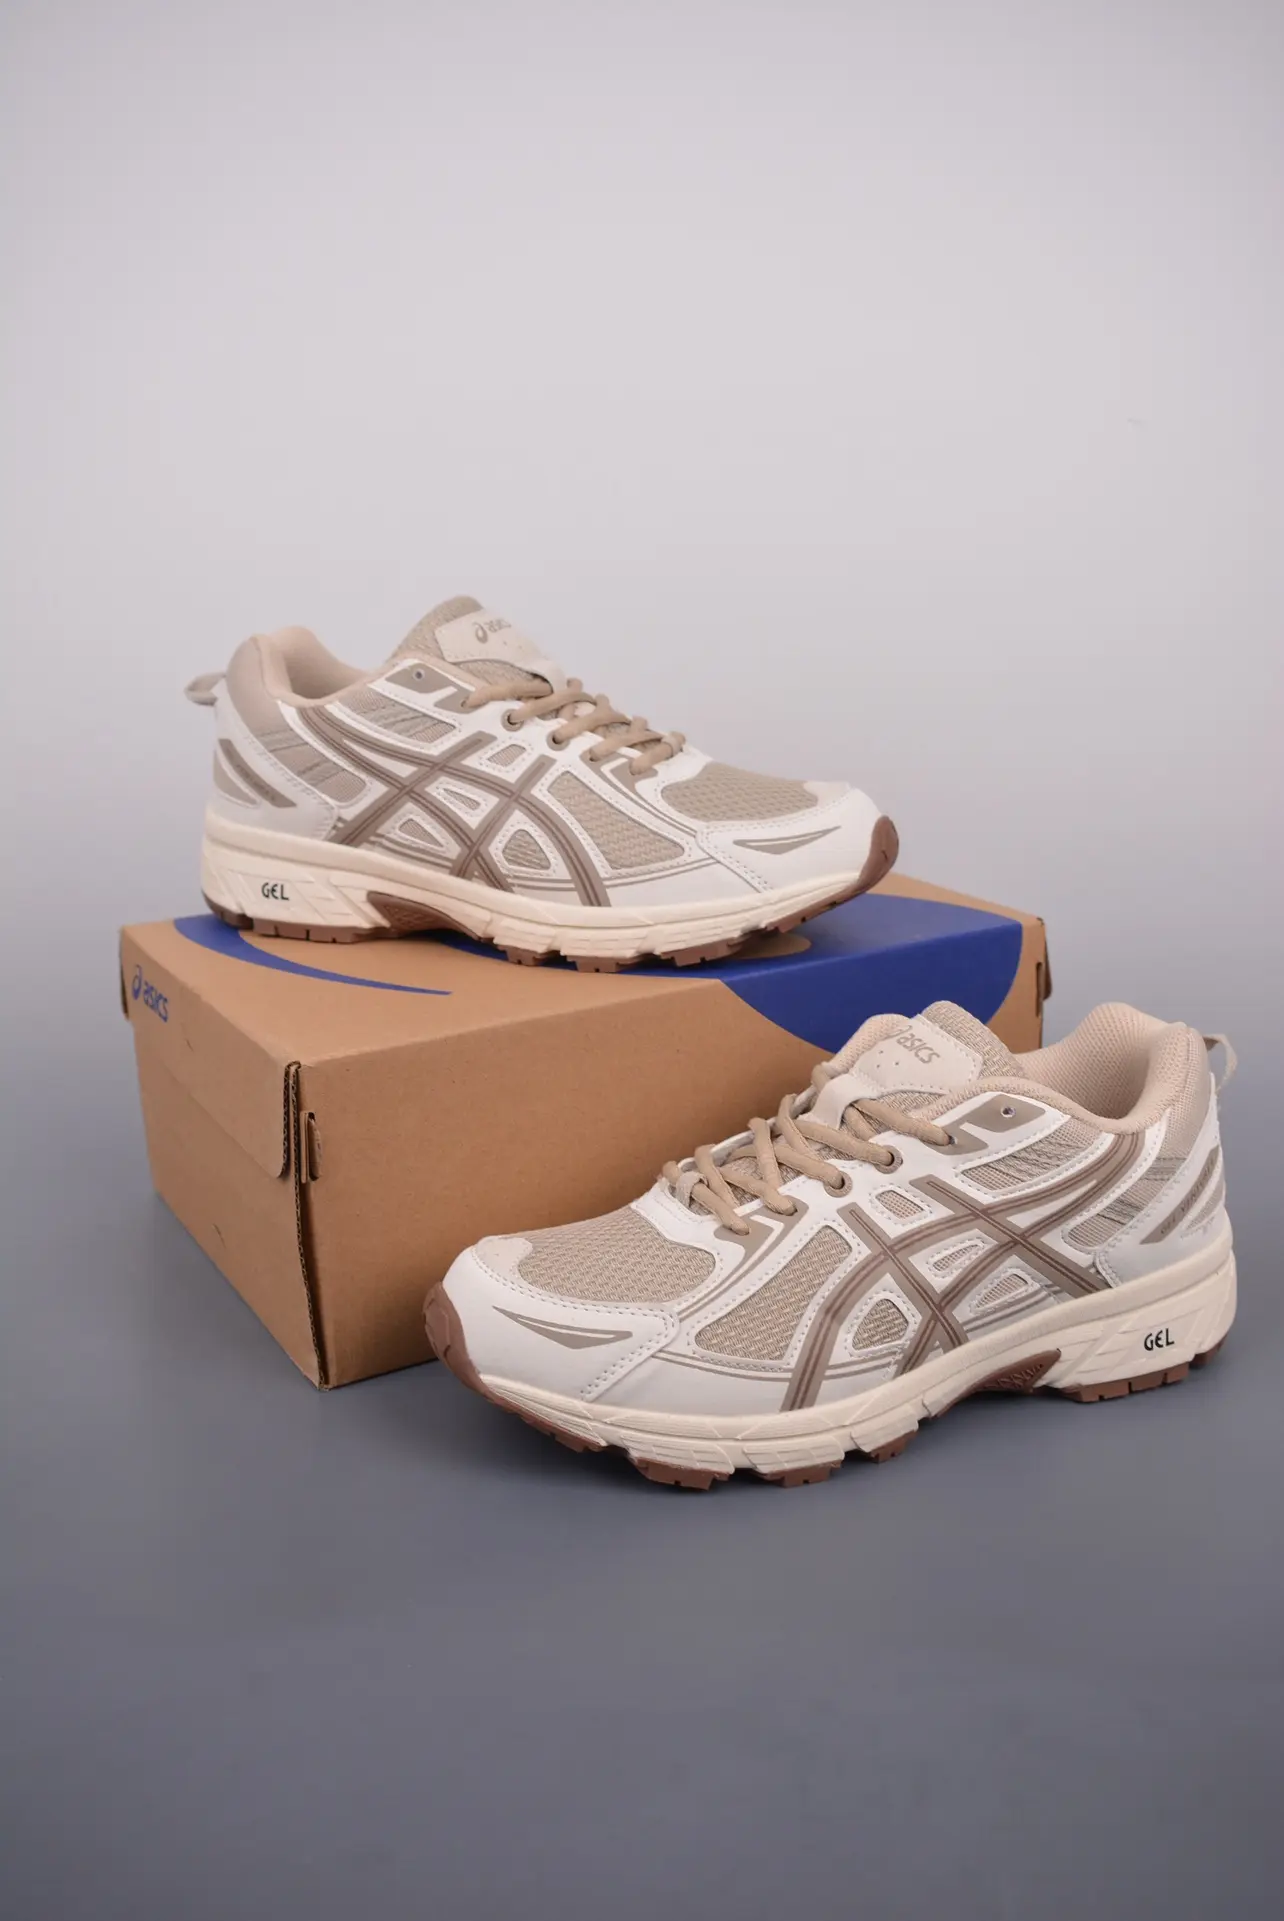 ASICS Gel Excite 9 Review: The Perfect Running Shoes for Comfort and Performance | YtaYta